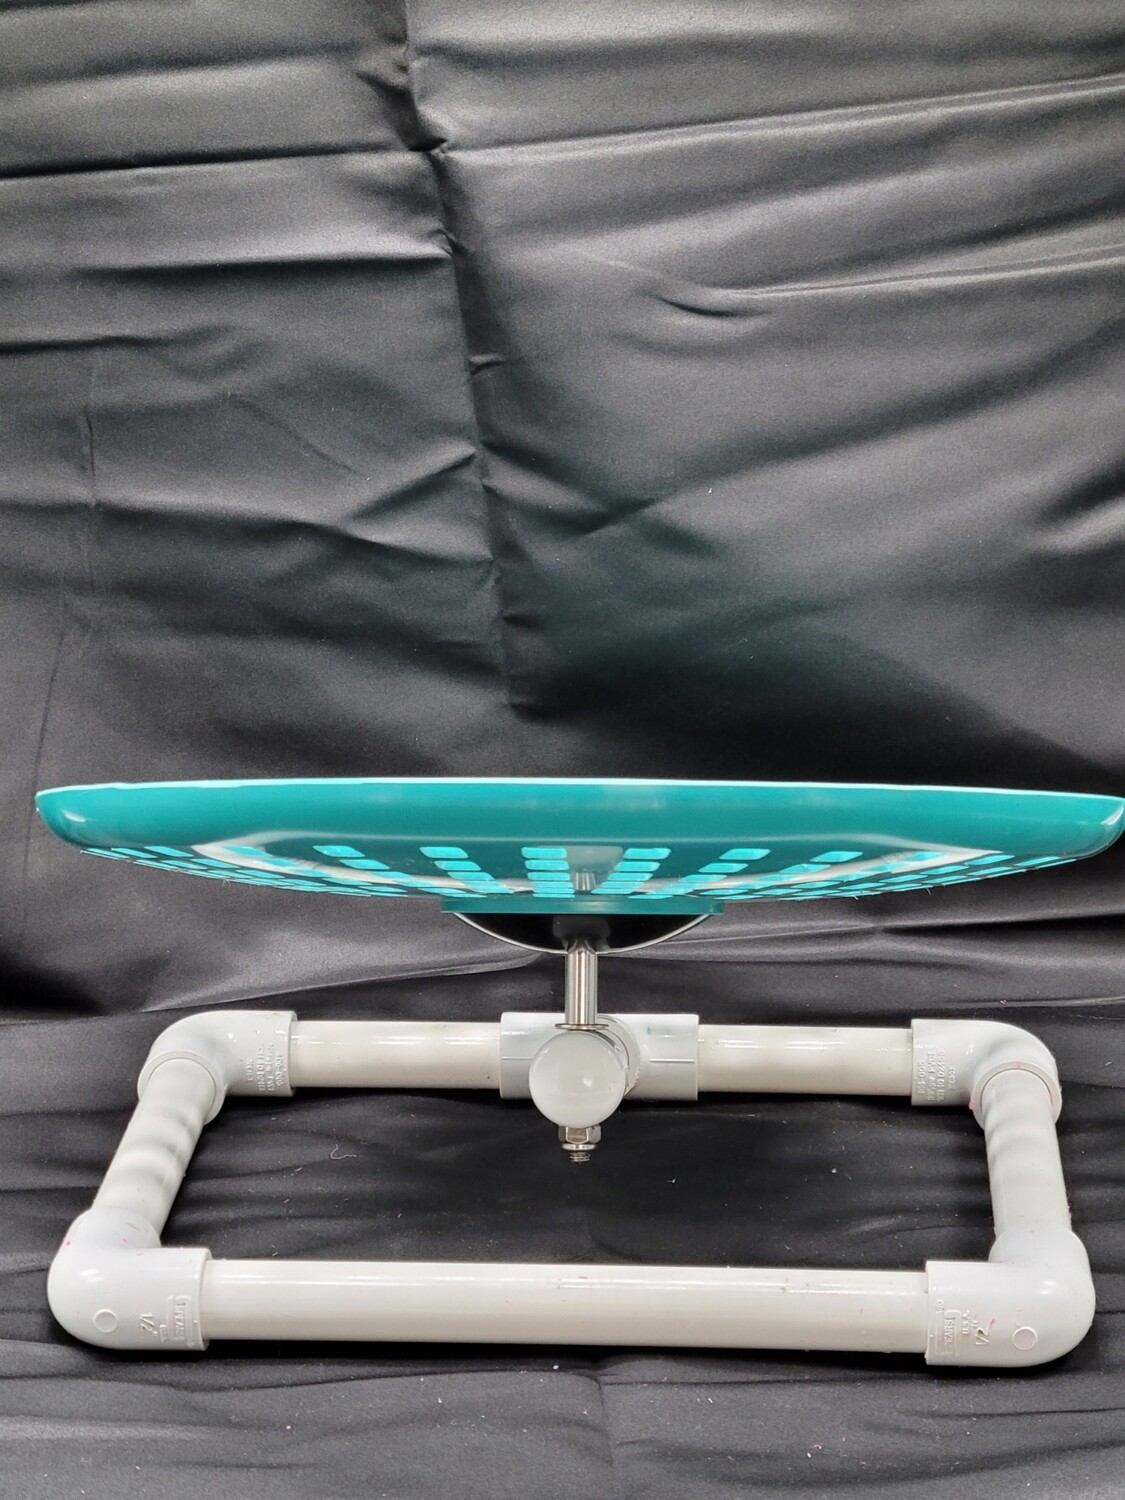 Teal Freedom Disk